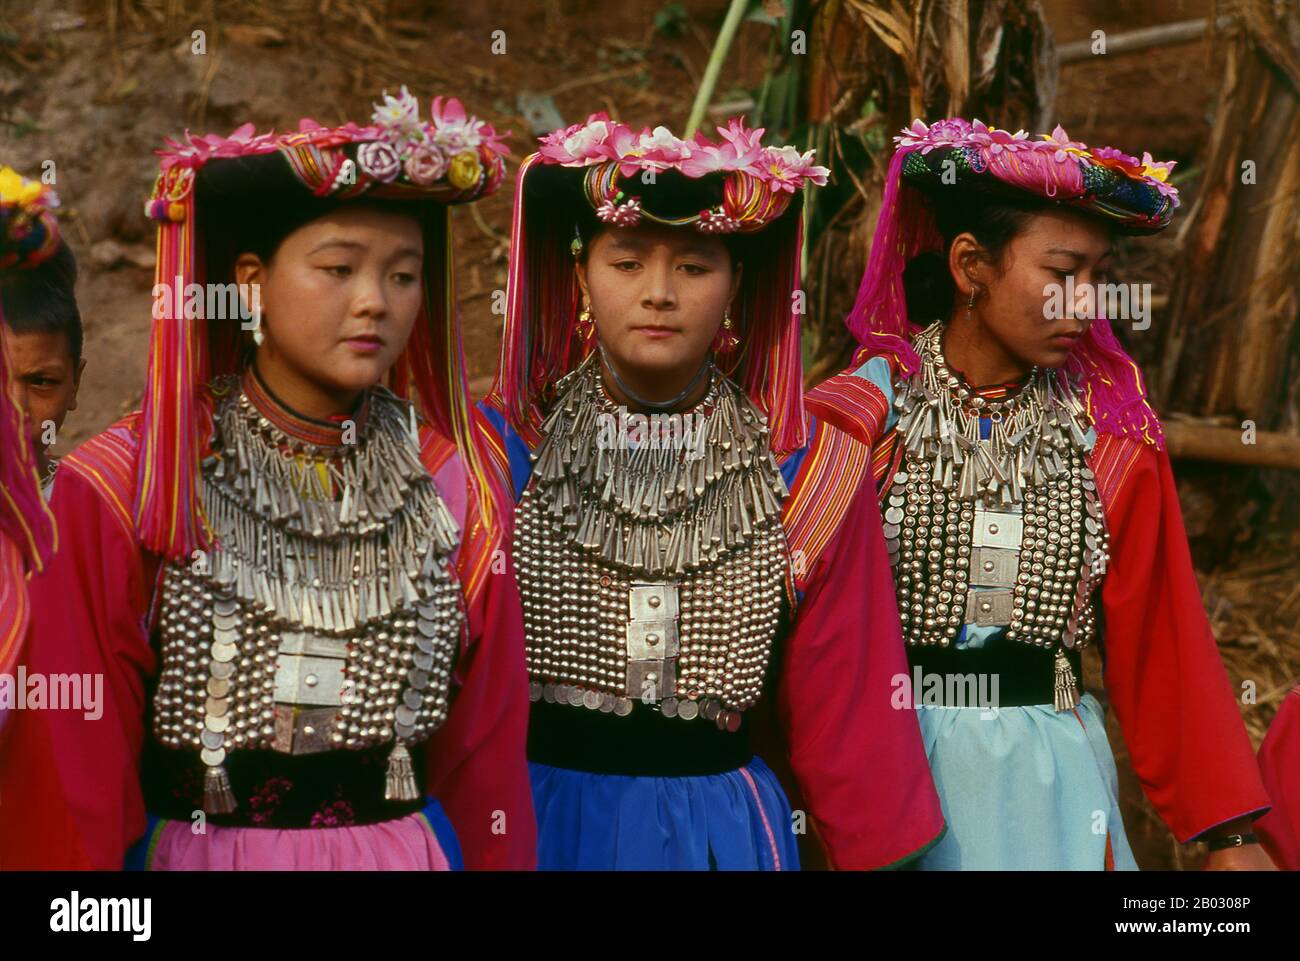 The Lisu people (Lìsù zú) are a Tibeto-Burman ethnic group who inhabit the mountainous regions of Burma (Myanmar), Southwest China, Thailand, and the Indian state of Arunachal Pradesh.  About 730,000 live in Lijiang, Baoshan, Nujiang, Diqing and Dehong prefectures in Yunnan Province, China. The Lisu form one of the 56 ethnic groups officially recognized by the People's Republic of China. In Burma, the Lisu are known as one of the seven Kachin minority groups and an estimated population of 350,000 Lisu live in Kachin and Shan State in Burma. Approximately 55,000 live in Thailand, where they are Stock Photo